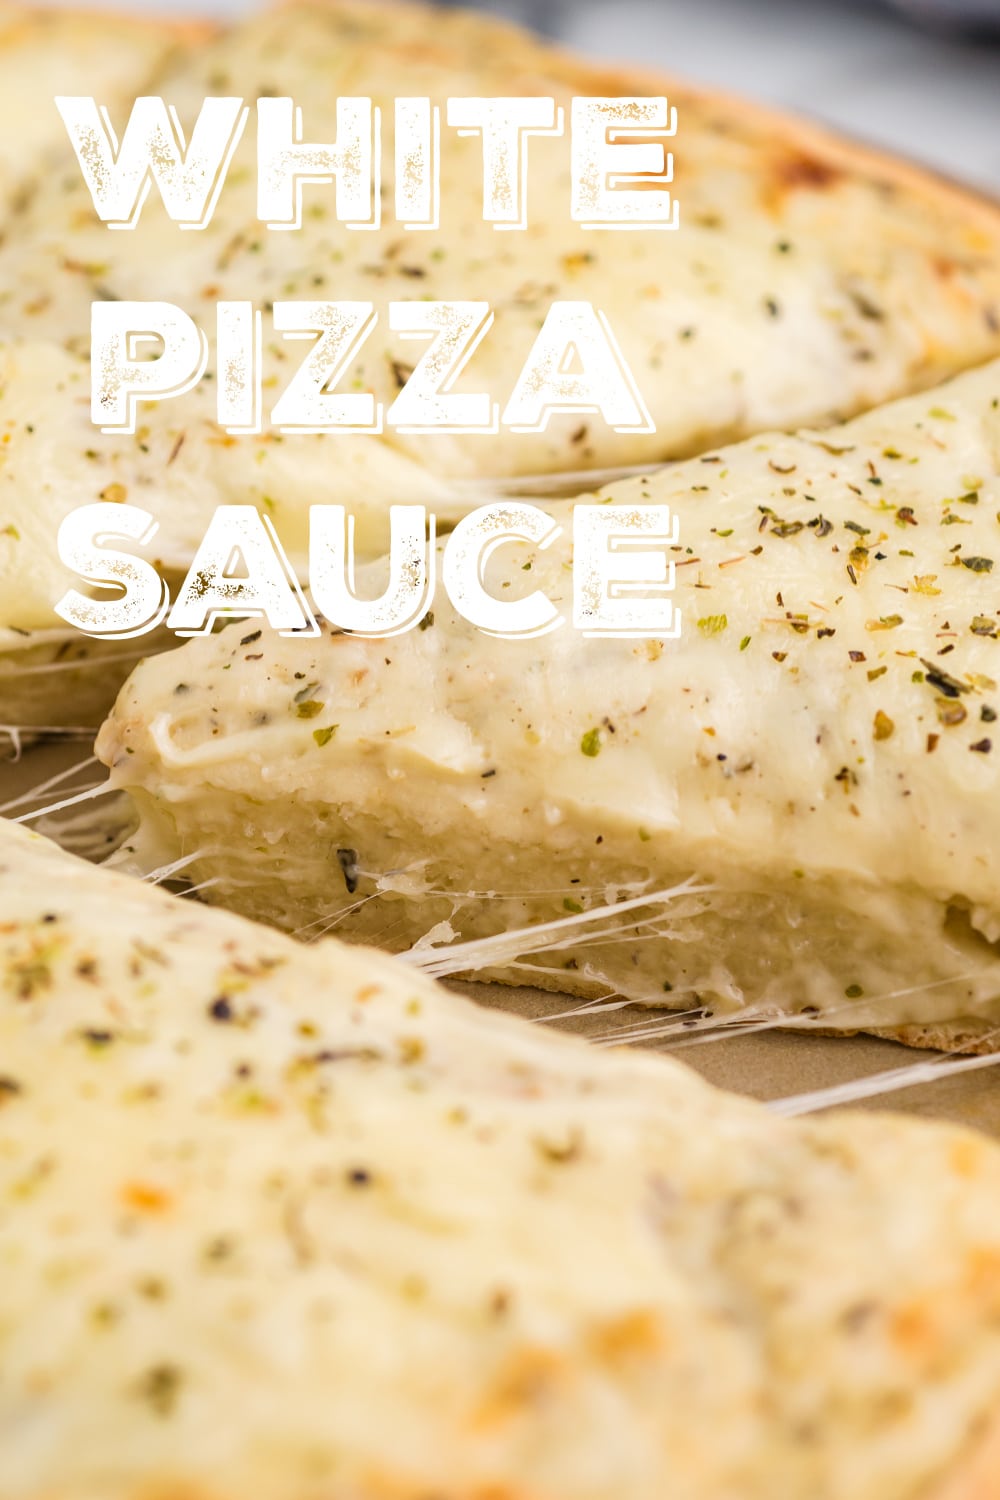 Even if you're a red sauce devotee, this White Pizza Sauce recipe just might enlighten your taste buds to the tasty power of a white sauced pie - especially when an alliance of the perfect cheese and toppings are chosen accordingly. via @cmpollak1